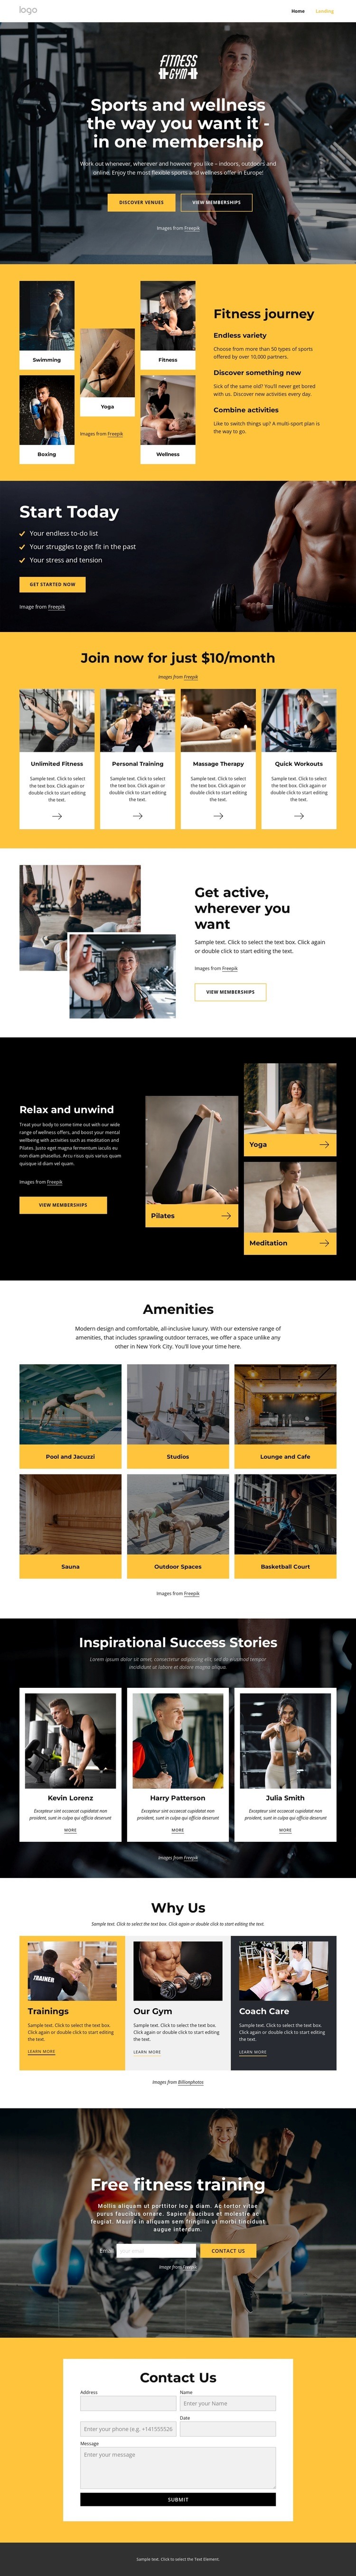 Gym, swimming, fitness classes Web Page Design